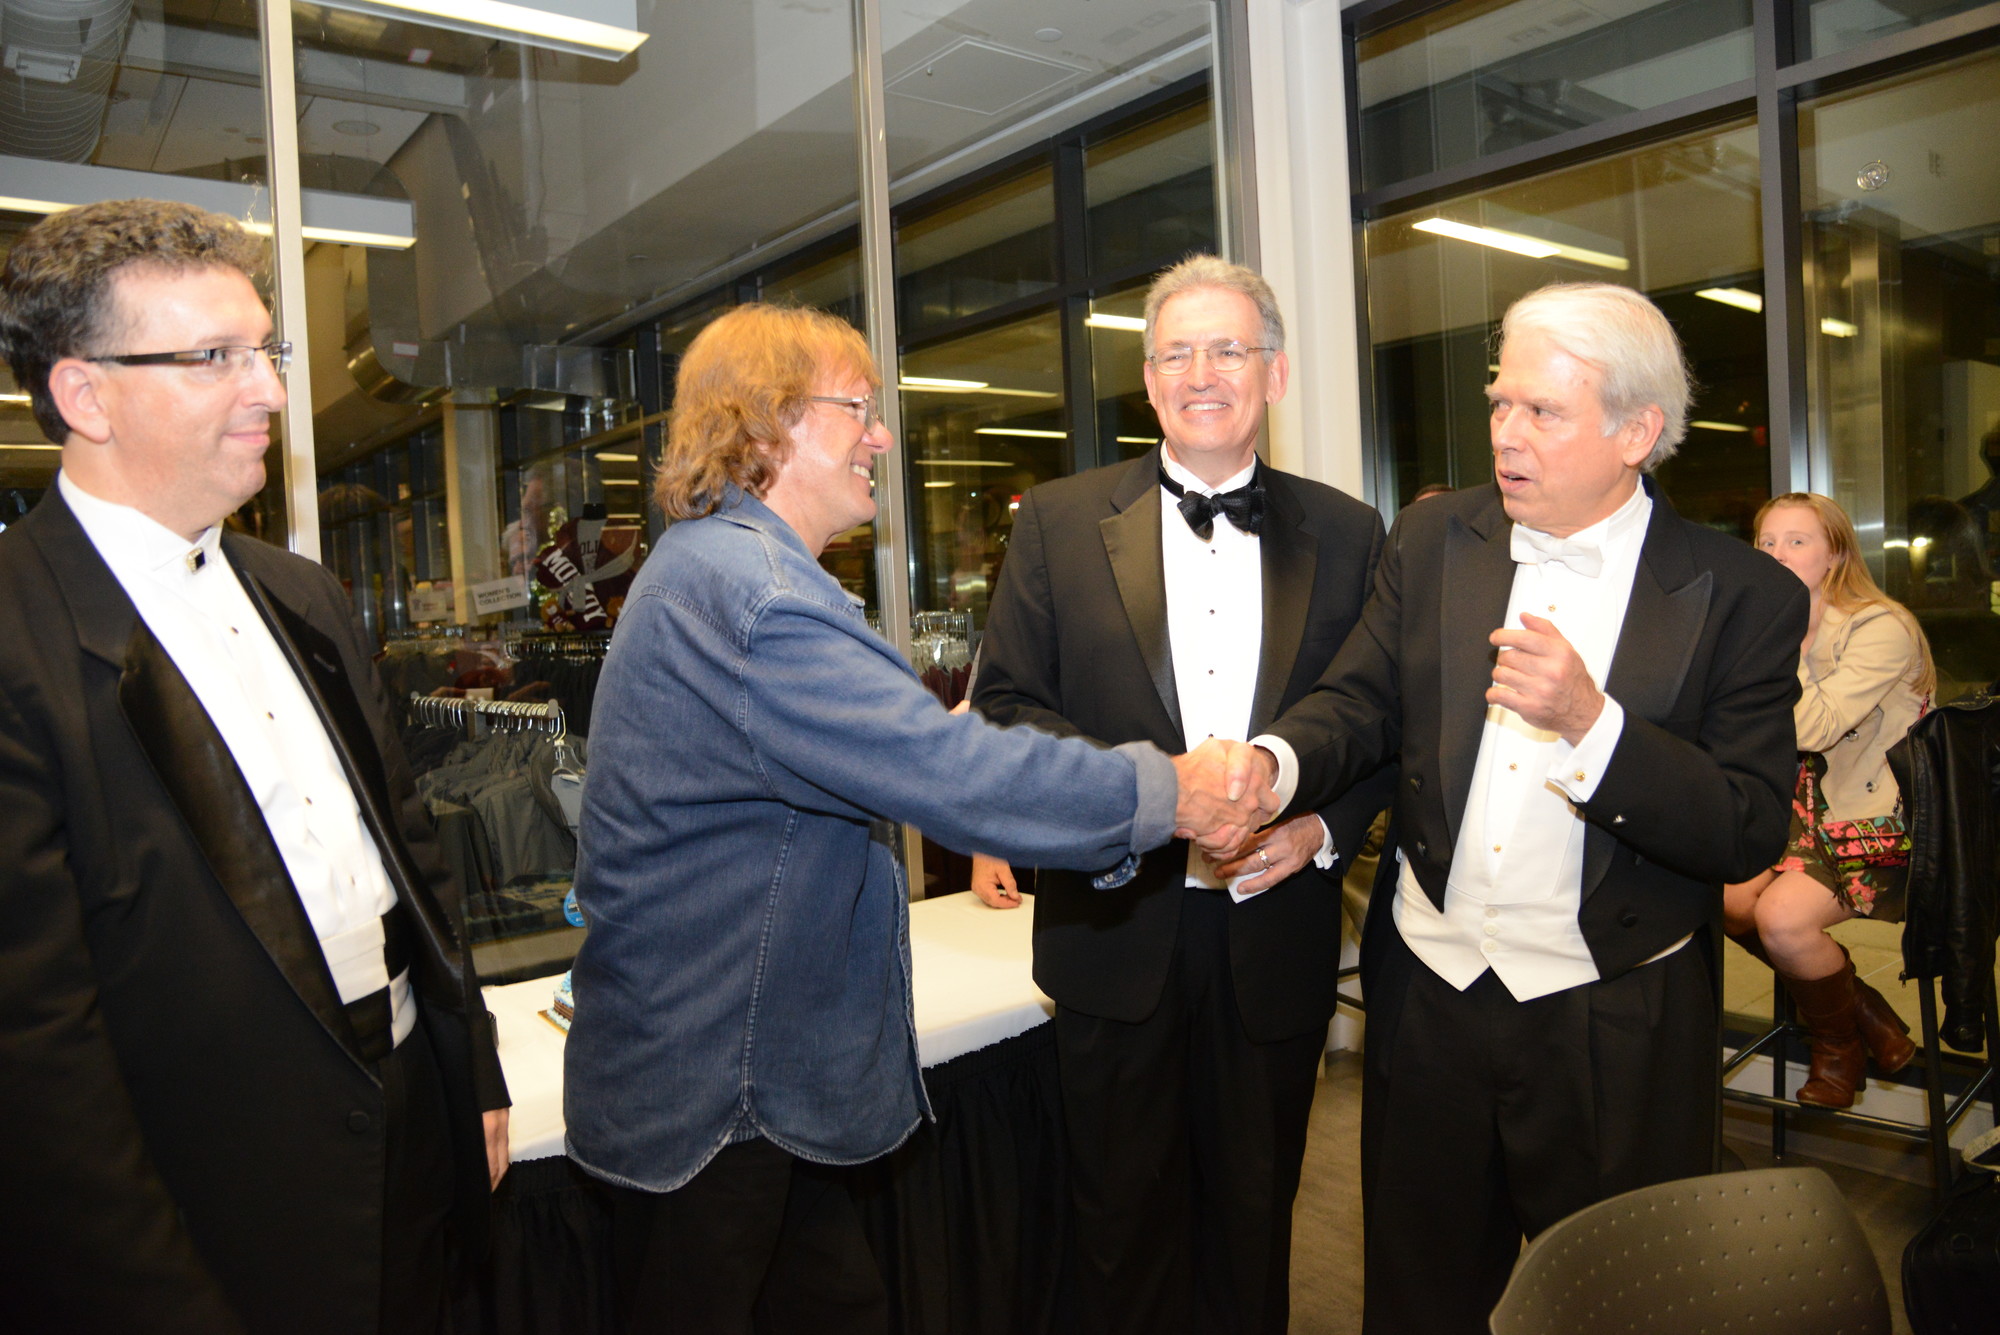 A celebration was held after the concert in honor of Emerson’s birthday — complete with birthday cake. Pictured were Biegel, Emerson, Wayne Lipton, president of the South Shore Symphony and the Rockville Centre Guild for the Arts, and conductor Scott Jackson Wiley.